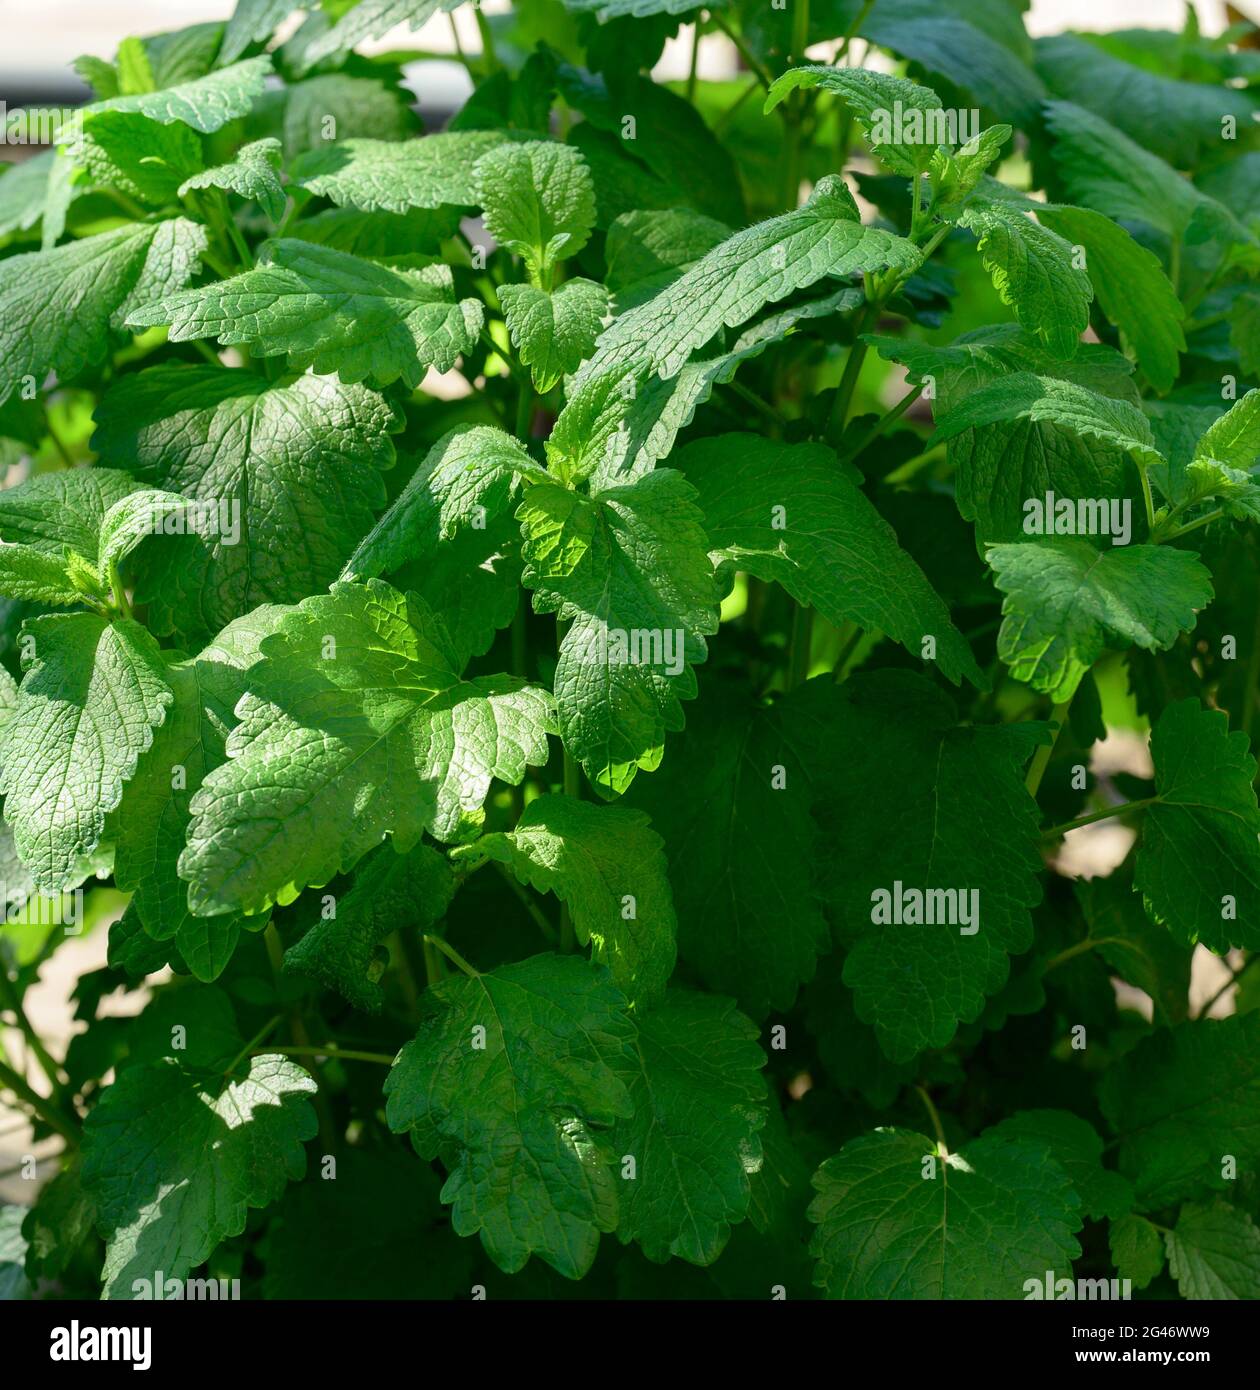 Mint bush with green leaves growing in the garden Stock Photo